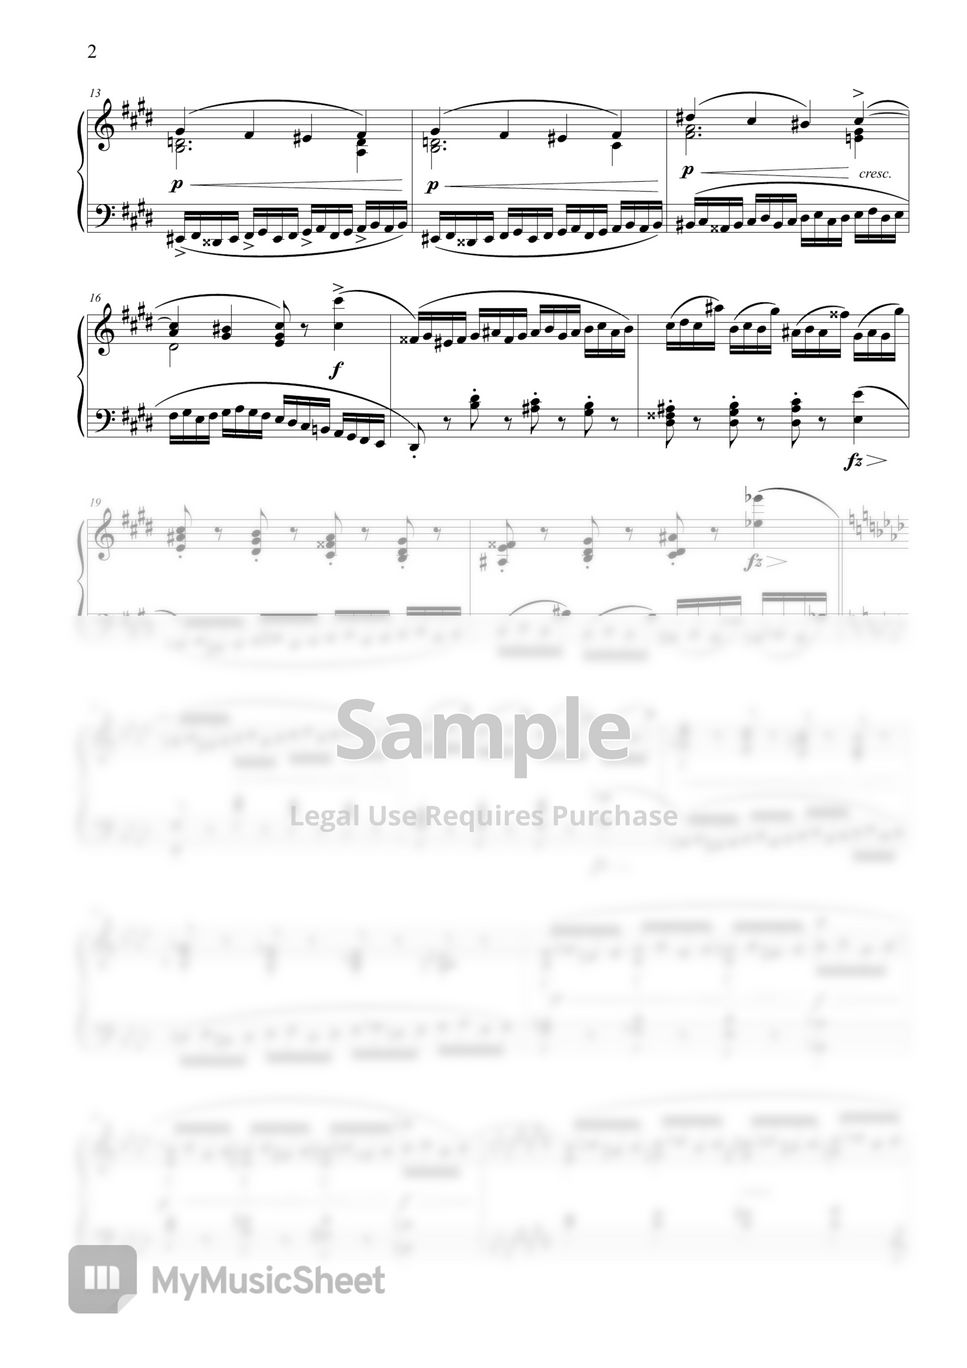 F. Chopin - Etude Chopin 10-4 by MyMusicSheet Official